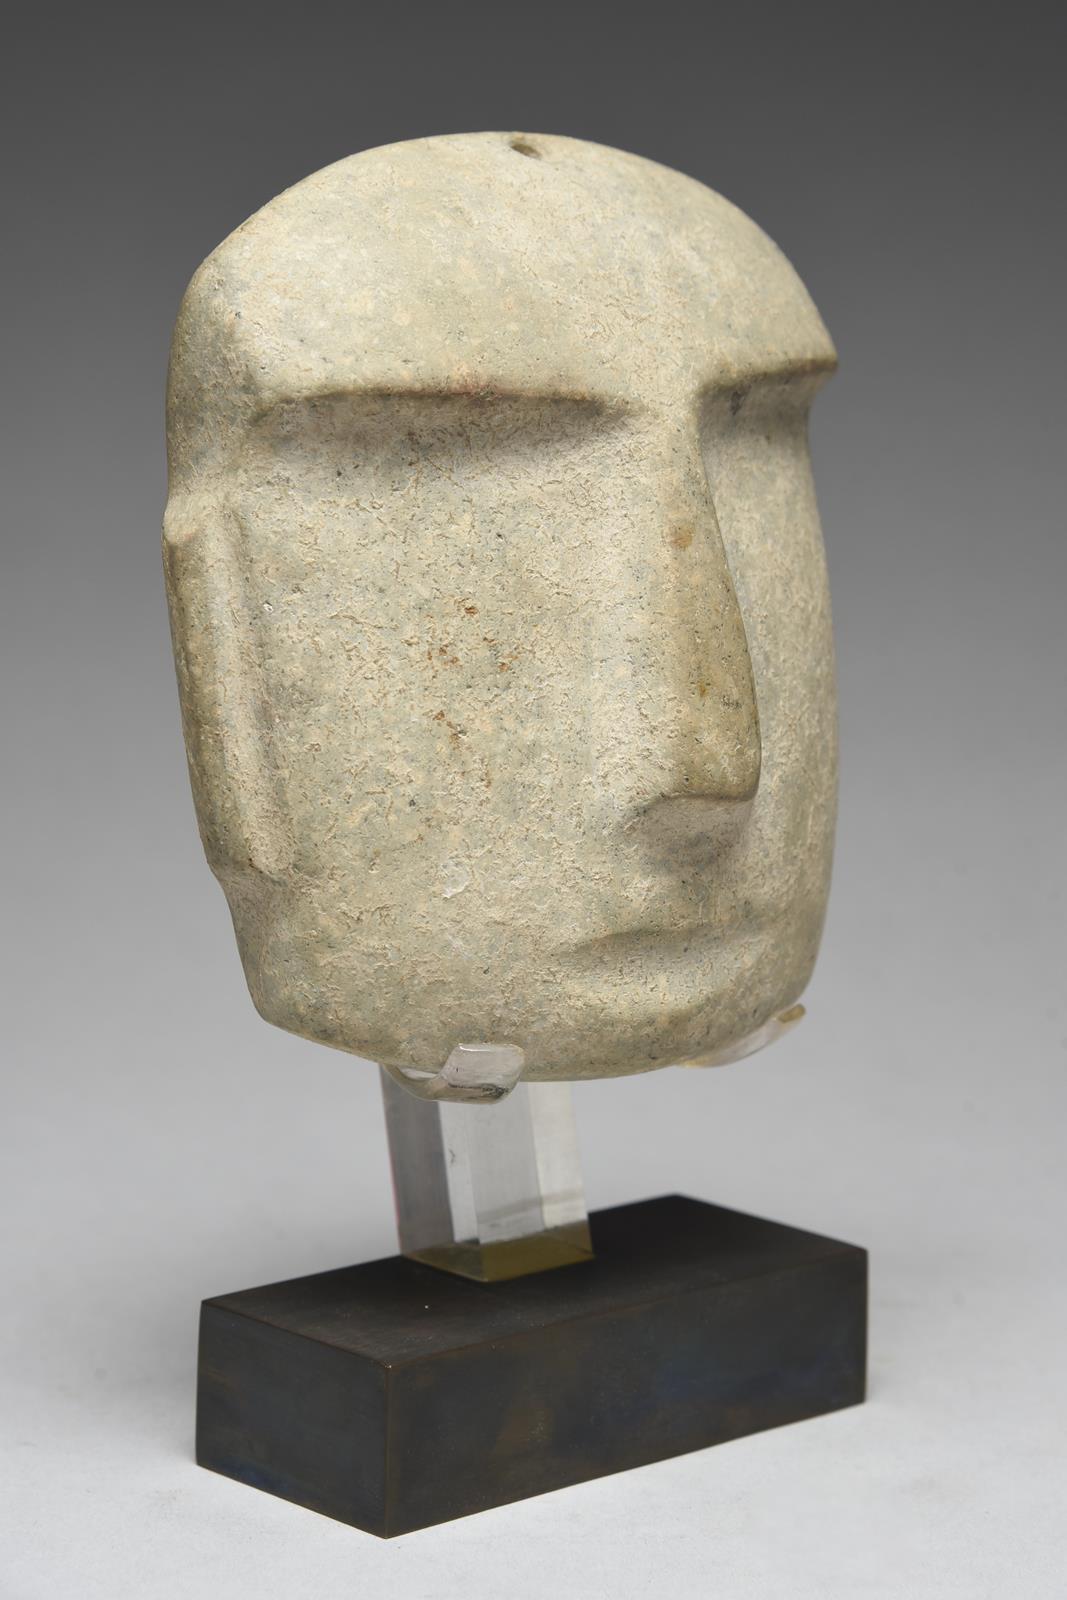 A Mezcala mask Mexico, circa 400 BC - 100 AD grey/green stone, with an overhanging brow and and - Image 6 of 6